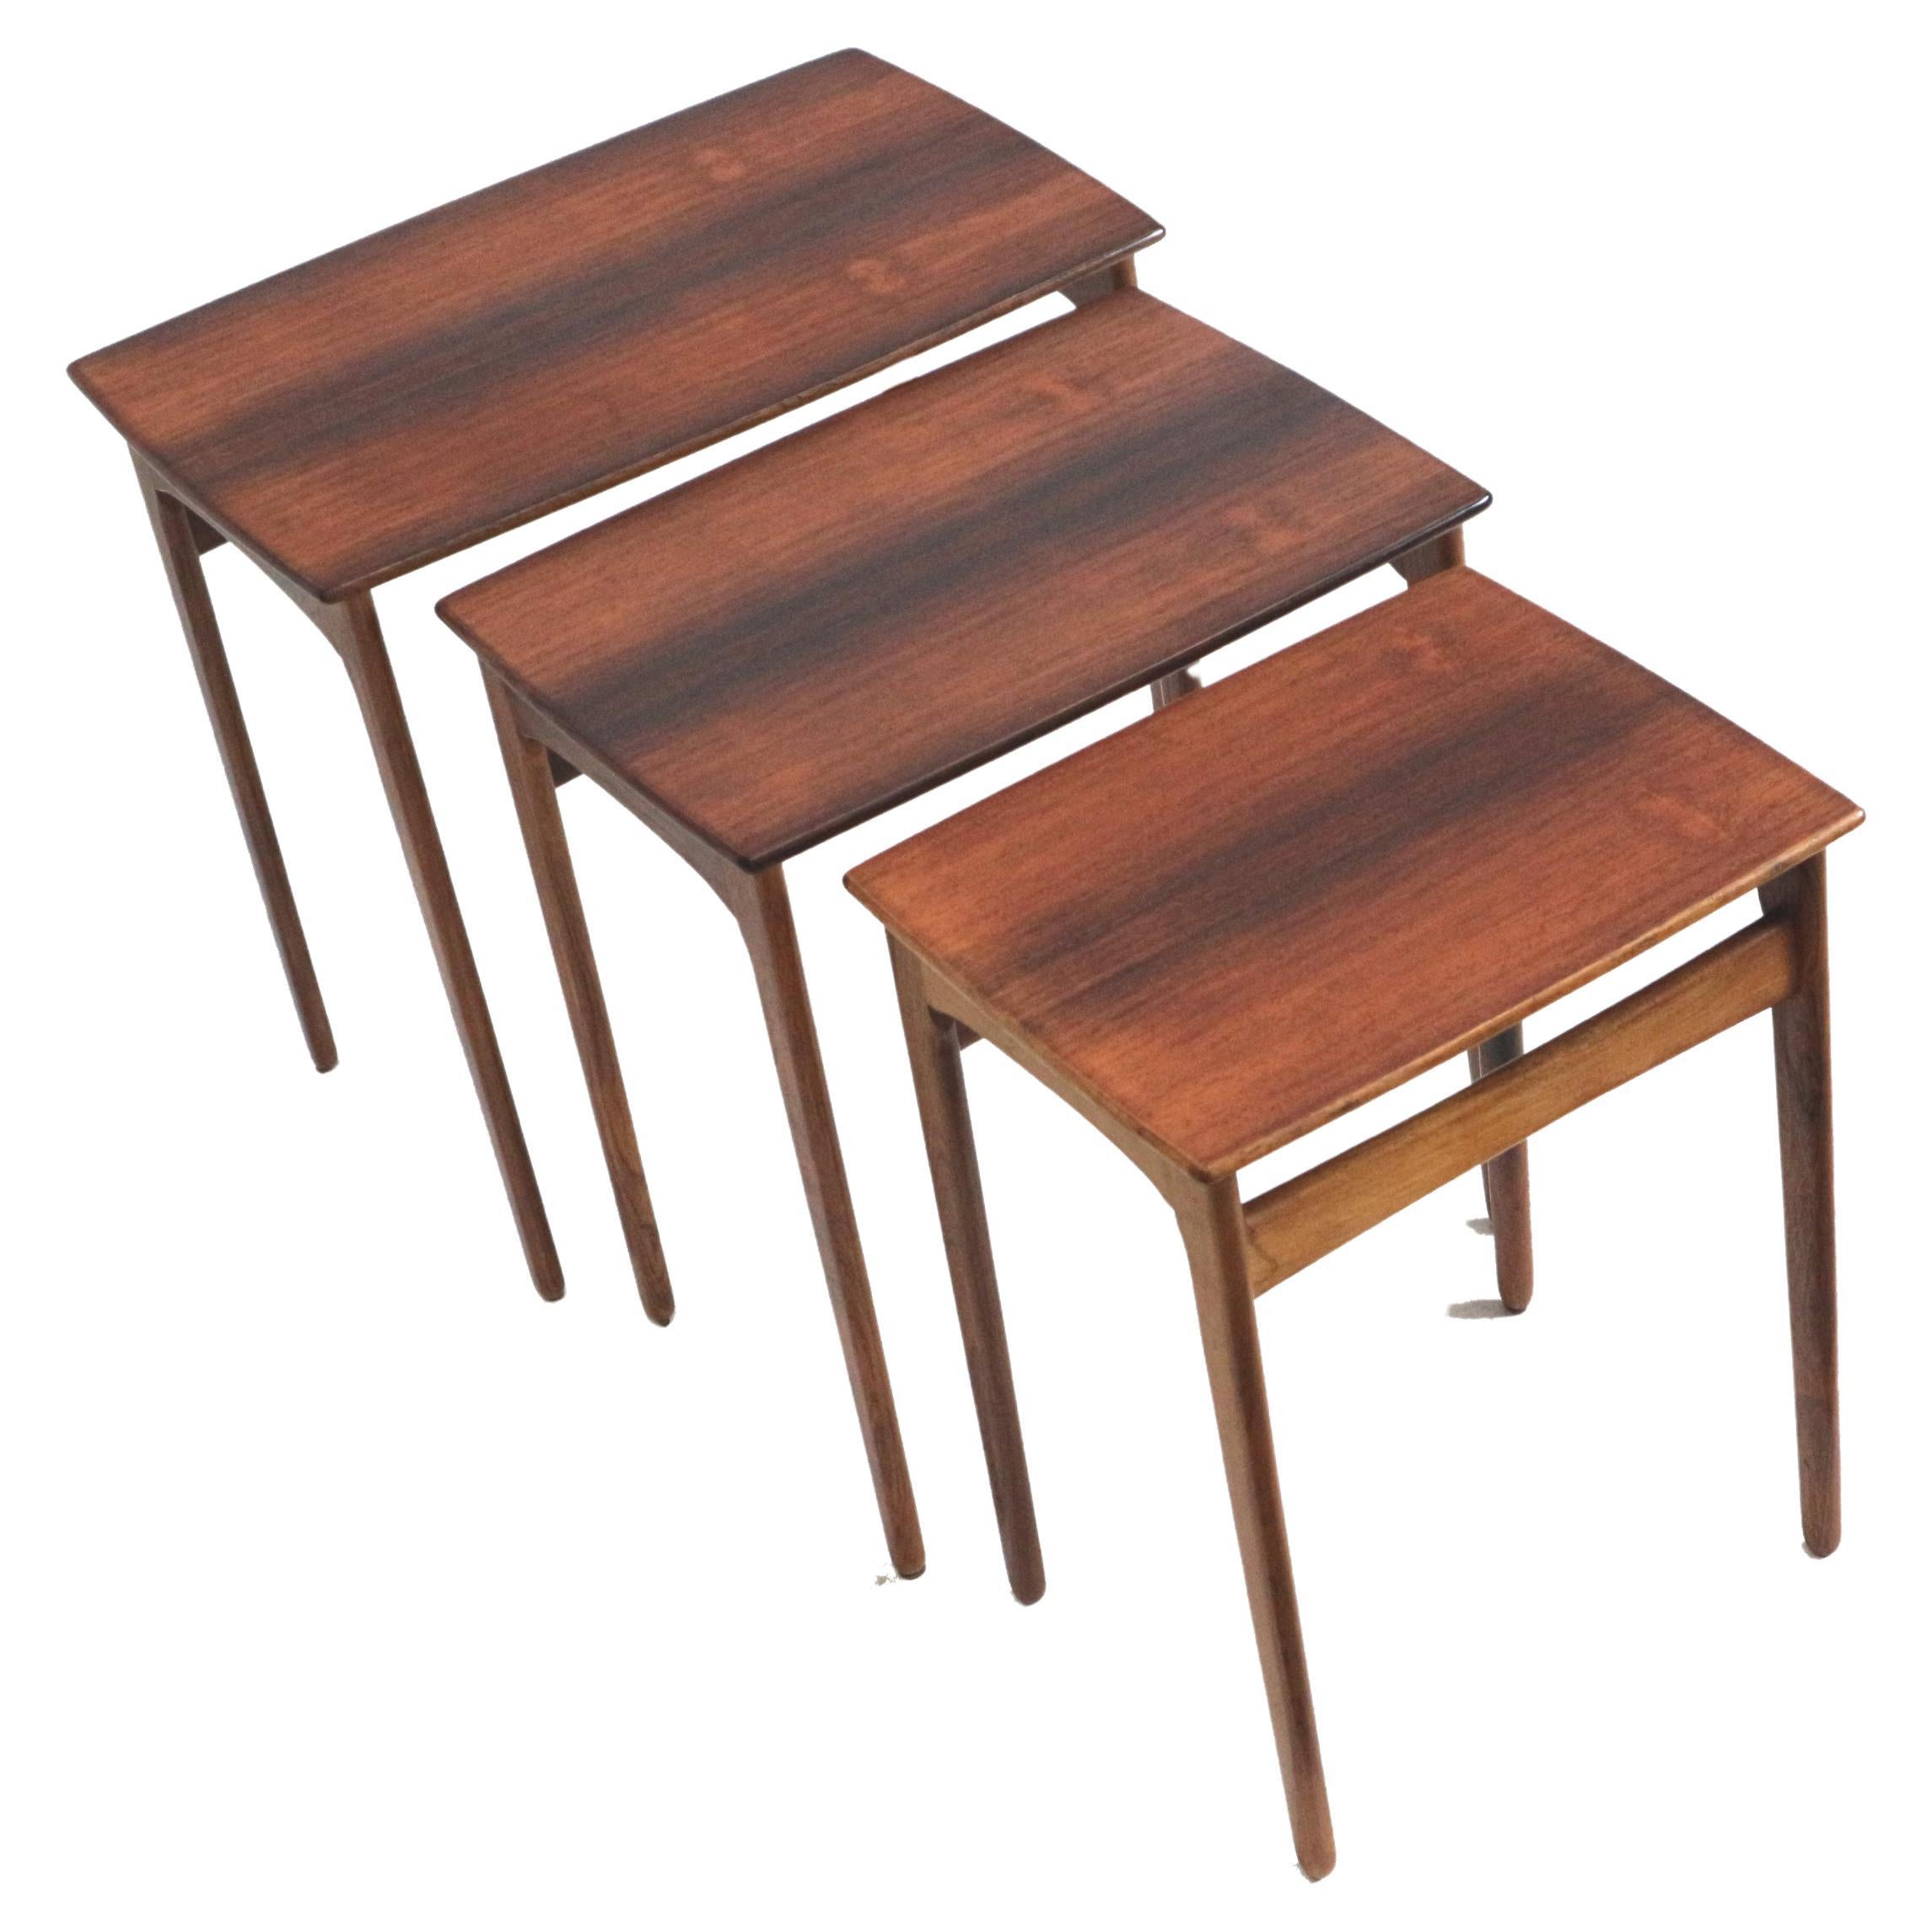 Danish vintage rosewood nesting tables / set of 3 side tables made in the 60s